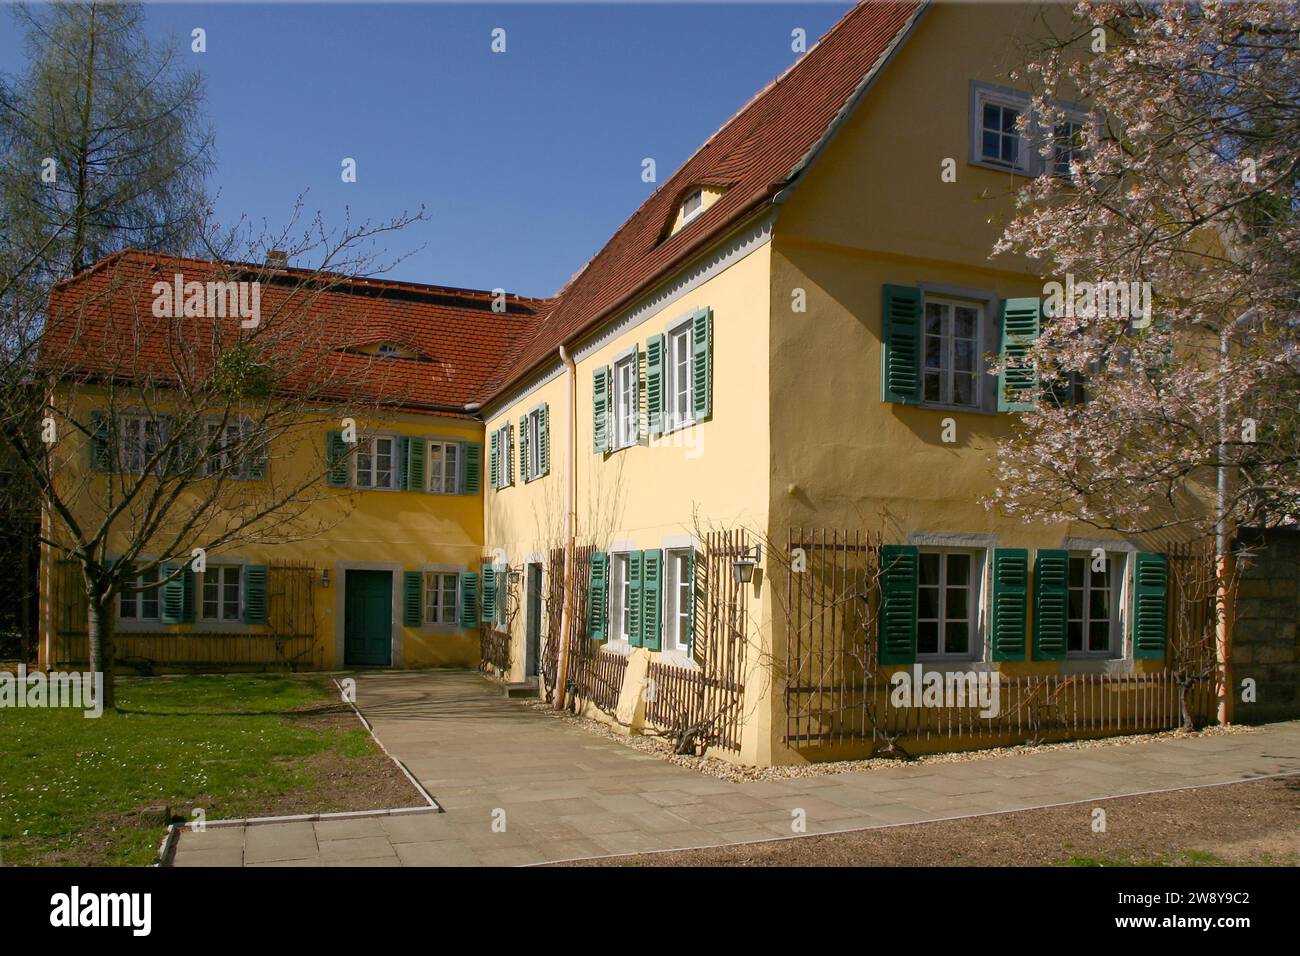 Carl Maria von Weber Museum, Hosterwitz, Dresdner Str. 44. Carl Maria von Weber (1786-1826) lived in the former winegrower's house after 1818 (Carl Stock Photo